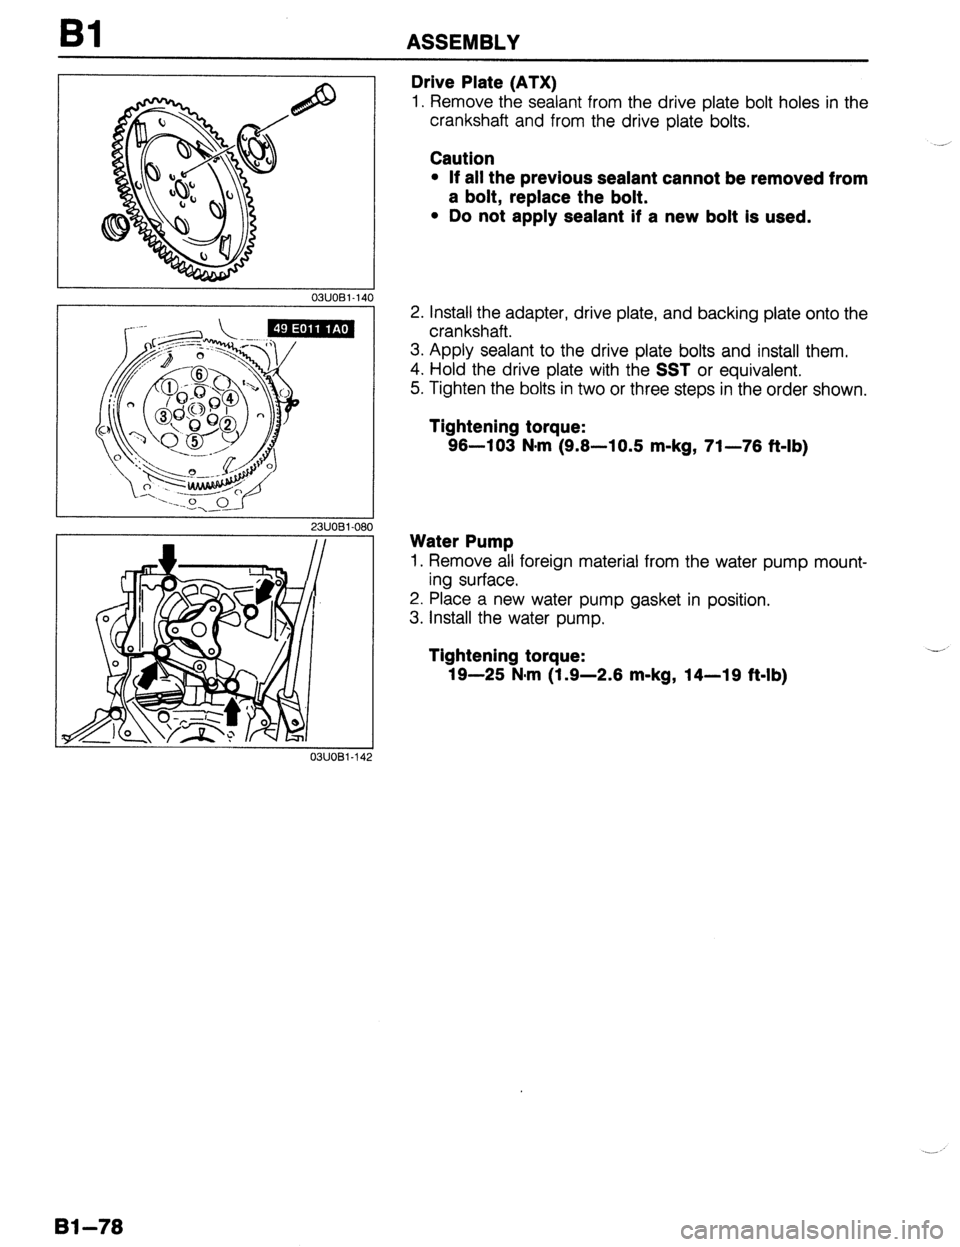 MAZDA PROTEGE 1992  Workshop Manual ASSEMBLY 
23UOBi-08 
0311081-14 
Drive Plate (ATX) 
1. Remove the sealant from the drive plate bolt holes in the 
crankshaft and from the drive plate bolts. 
Caution 
l If all the previous sealant can